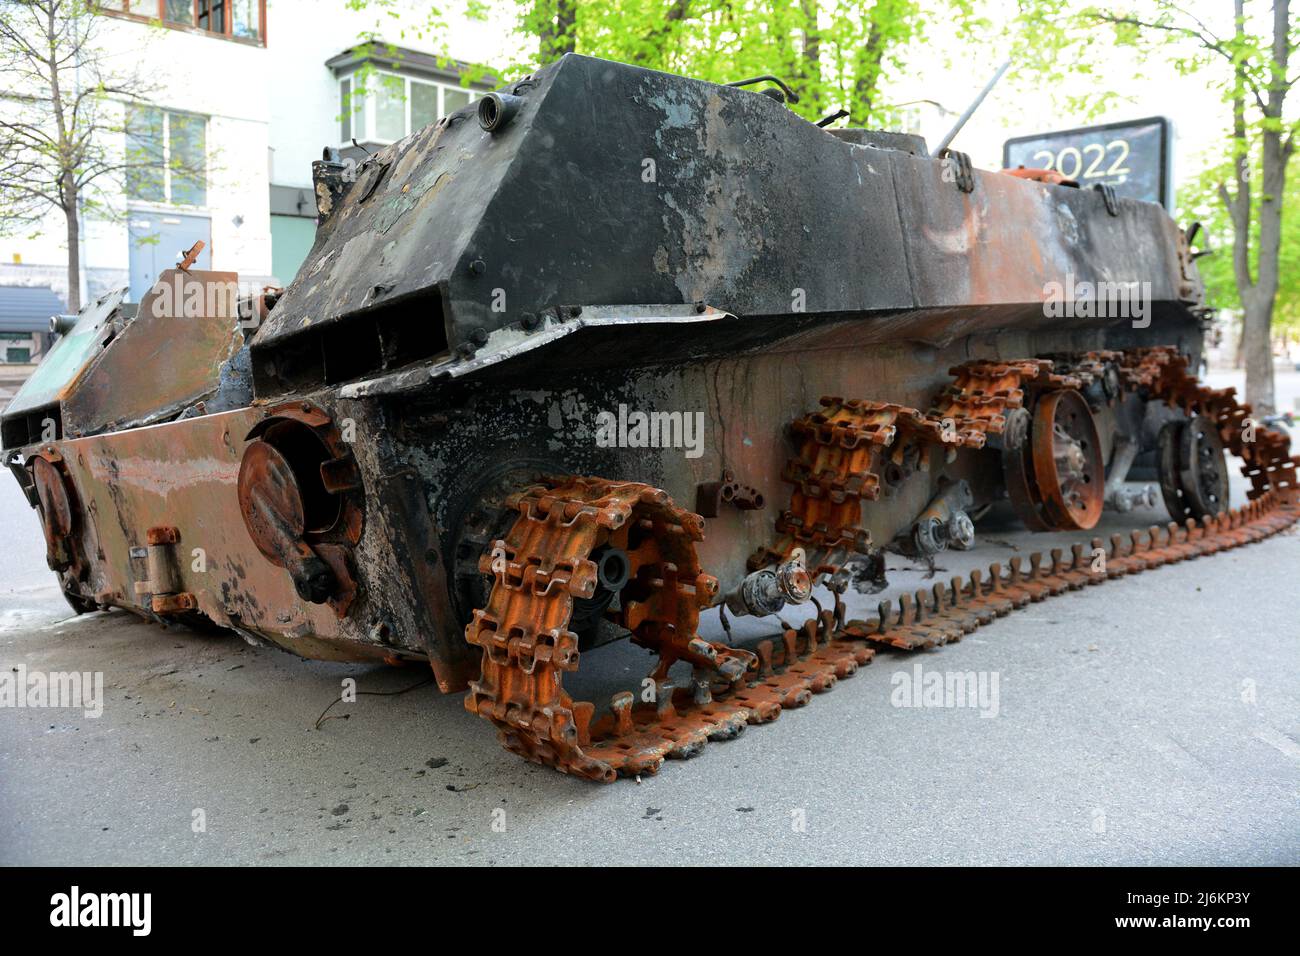 Kyiv region, Ukraine - 02 May 2022, A destroyed Russian tank parked on the roadside, it was destroyed by the Ukrainian military in the Kiev region. Russia invaded Ukraine on 24 February 2022, triggering the largest military attack in Europe since World War II. Stock Photo